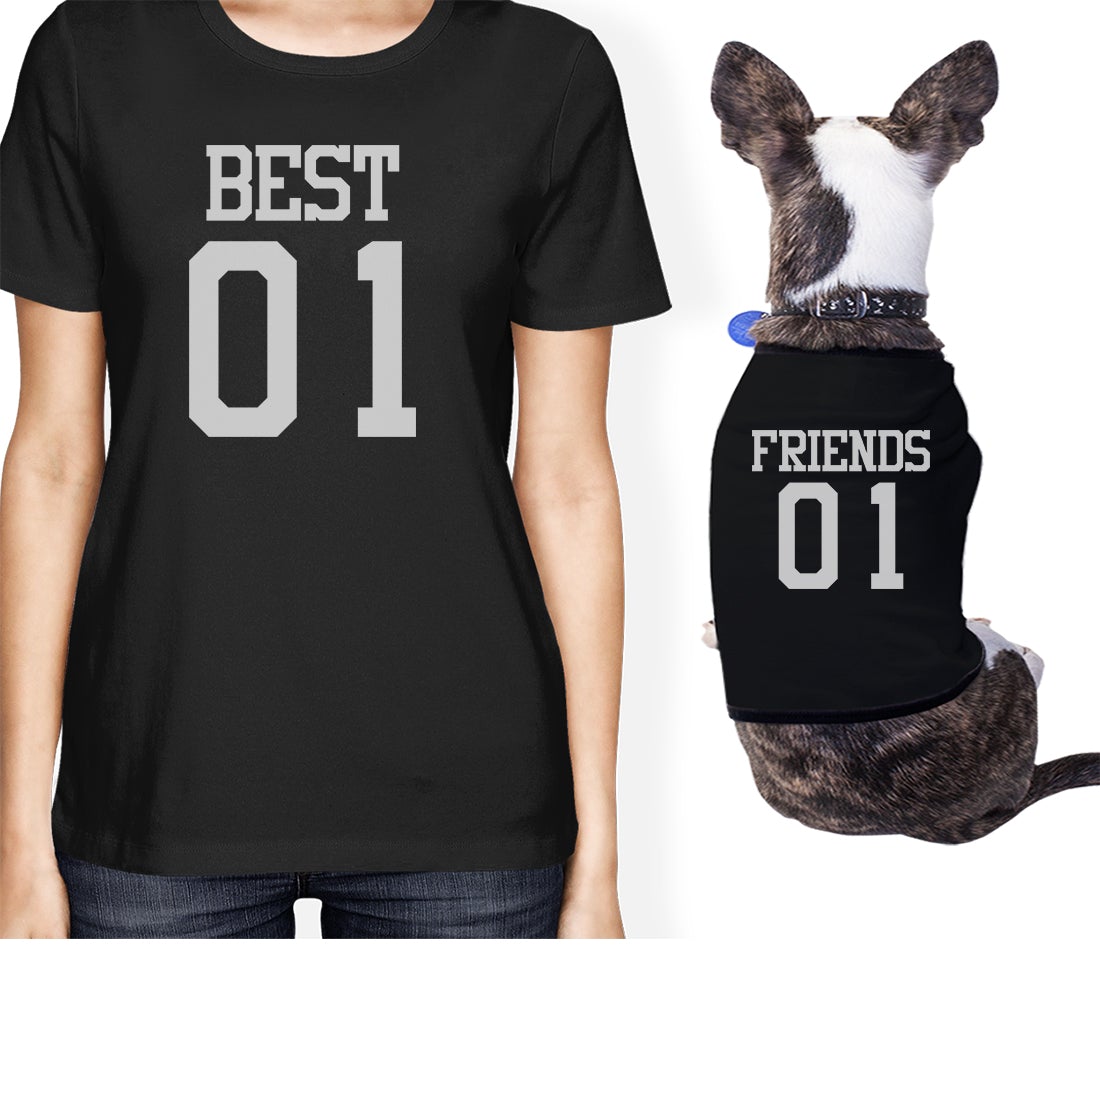 Best01 Friends01 Small Dog Owner Matching Apparel For Dog Moms Black